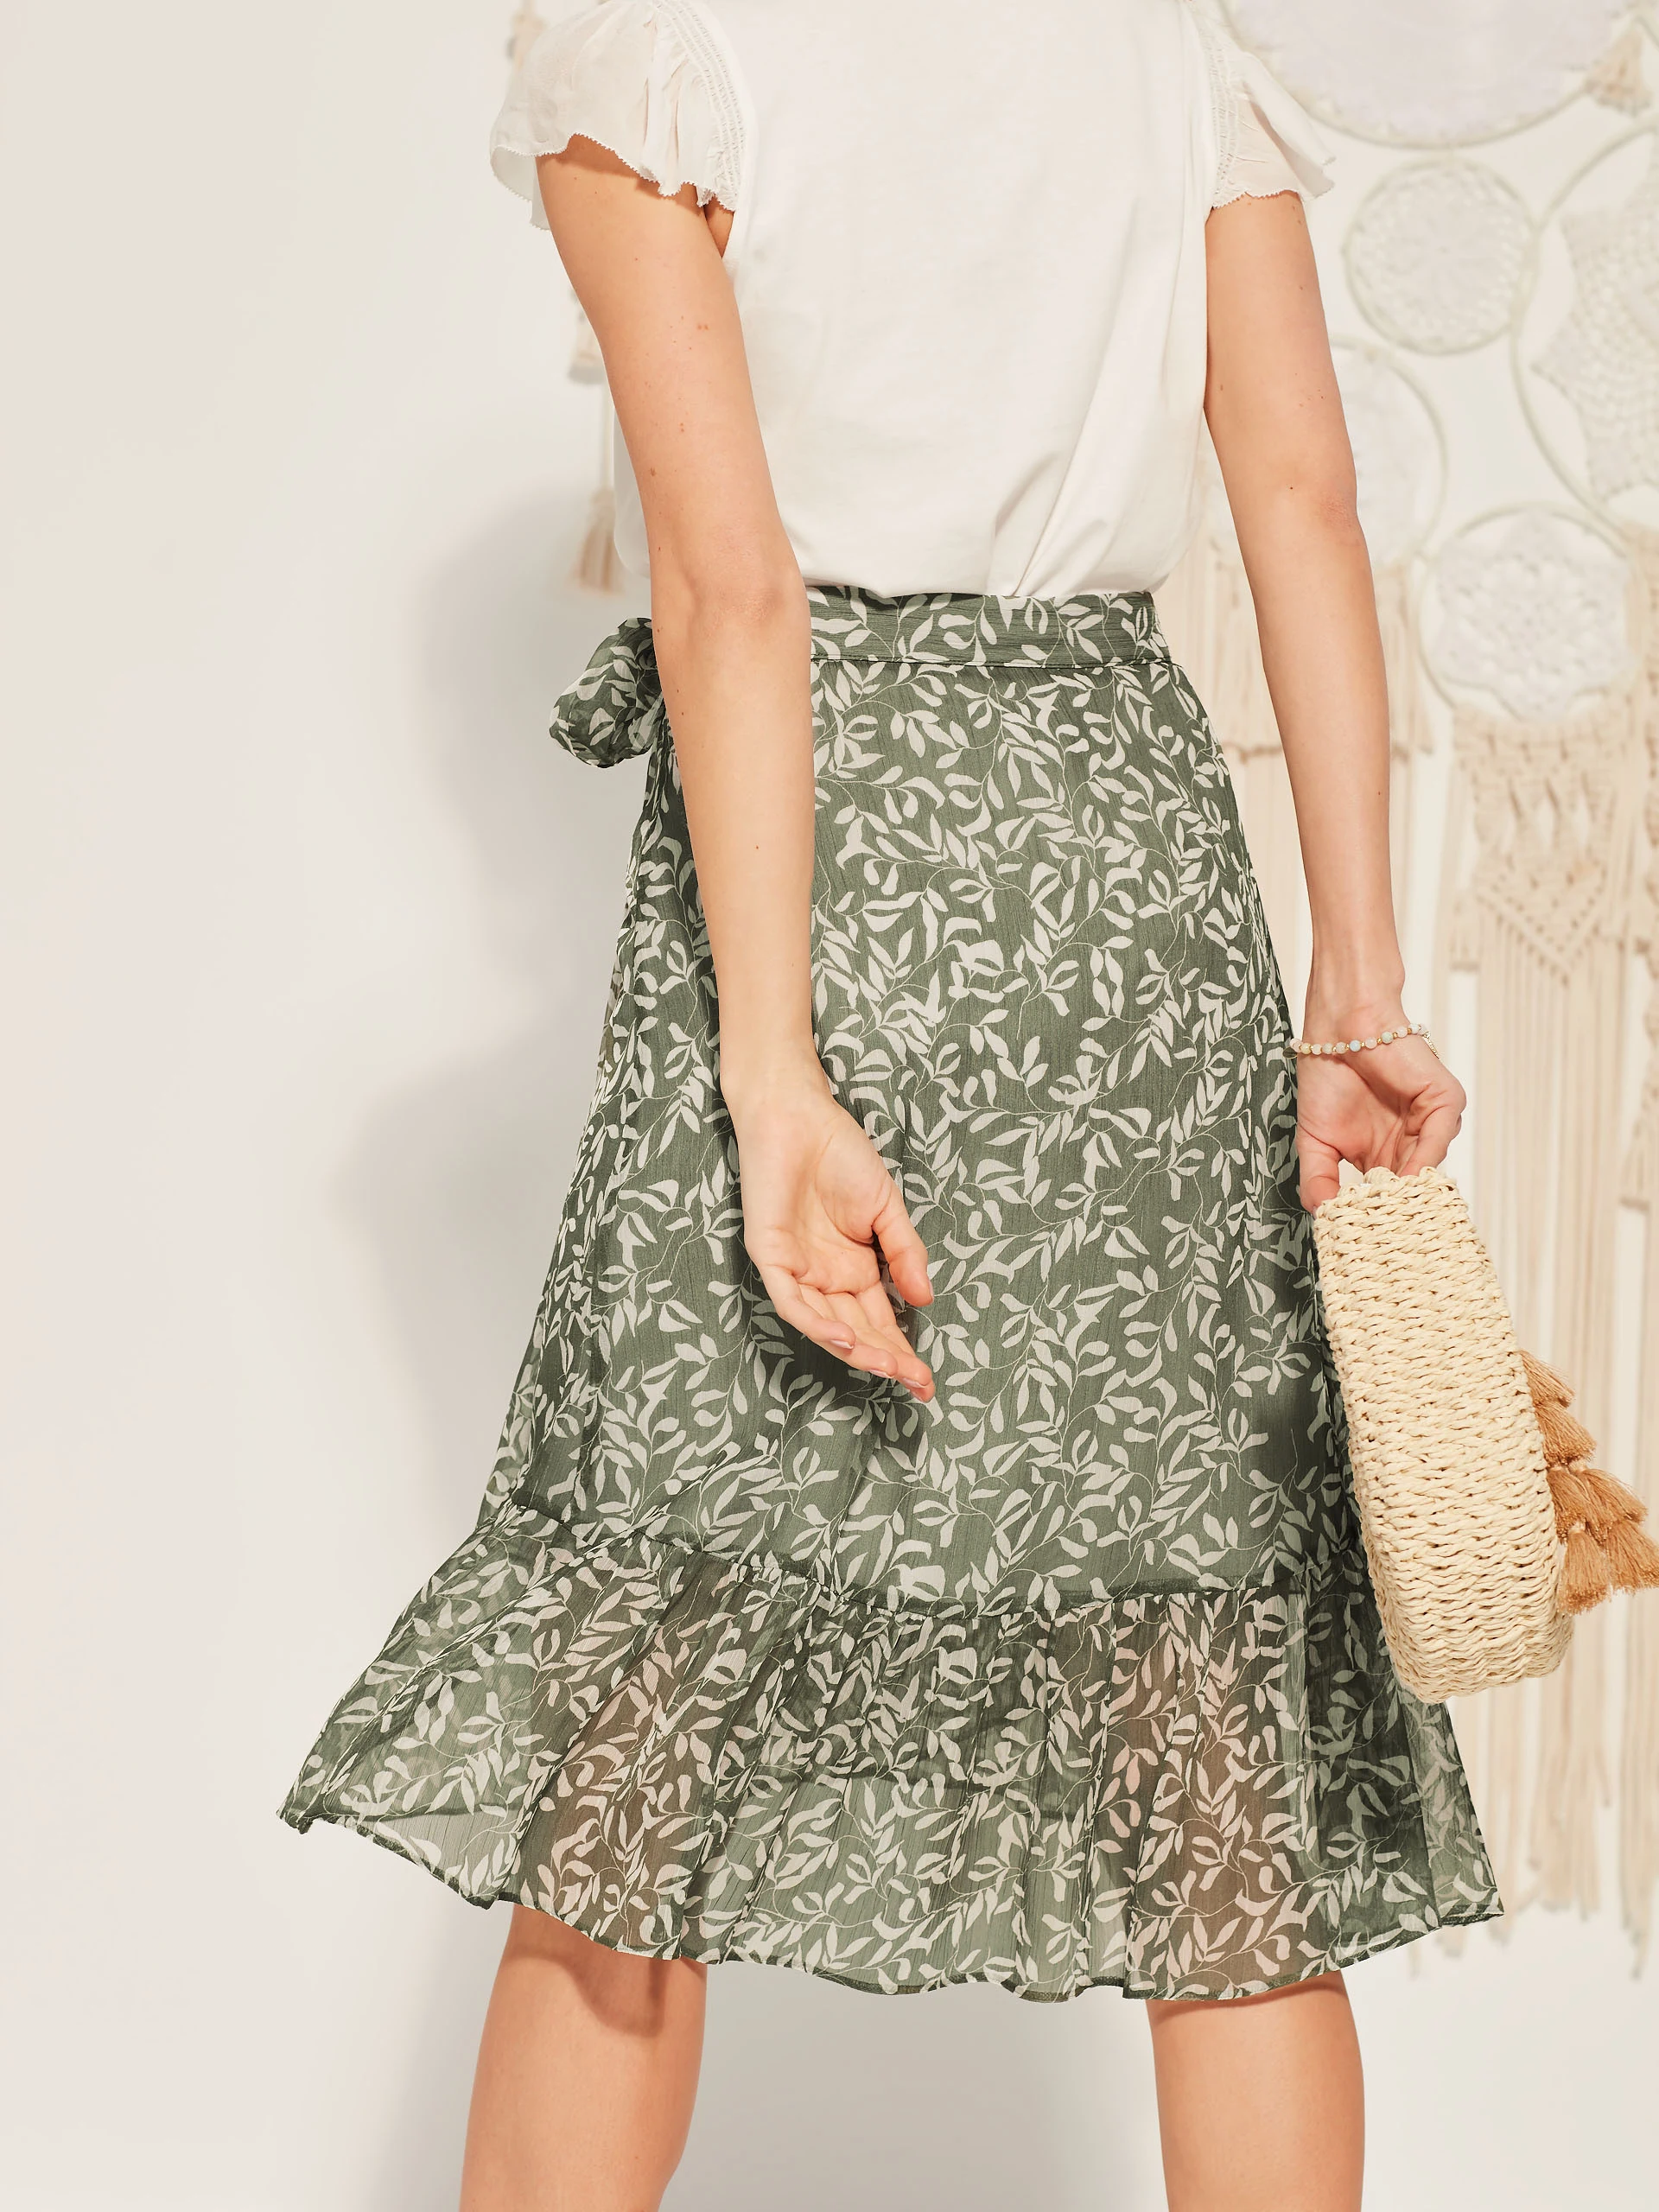 ETHEREAL SKIRT WITH FINE PATTERN